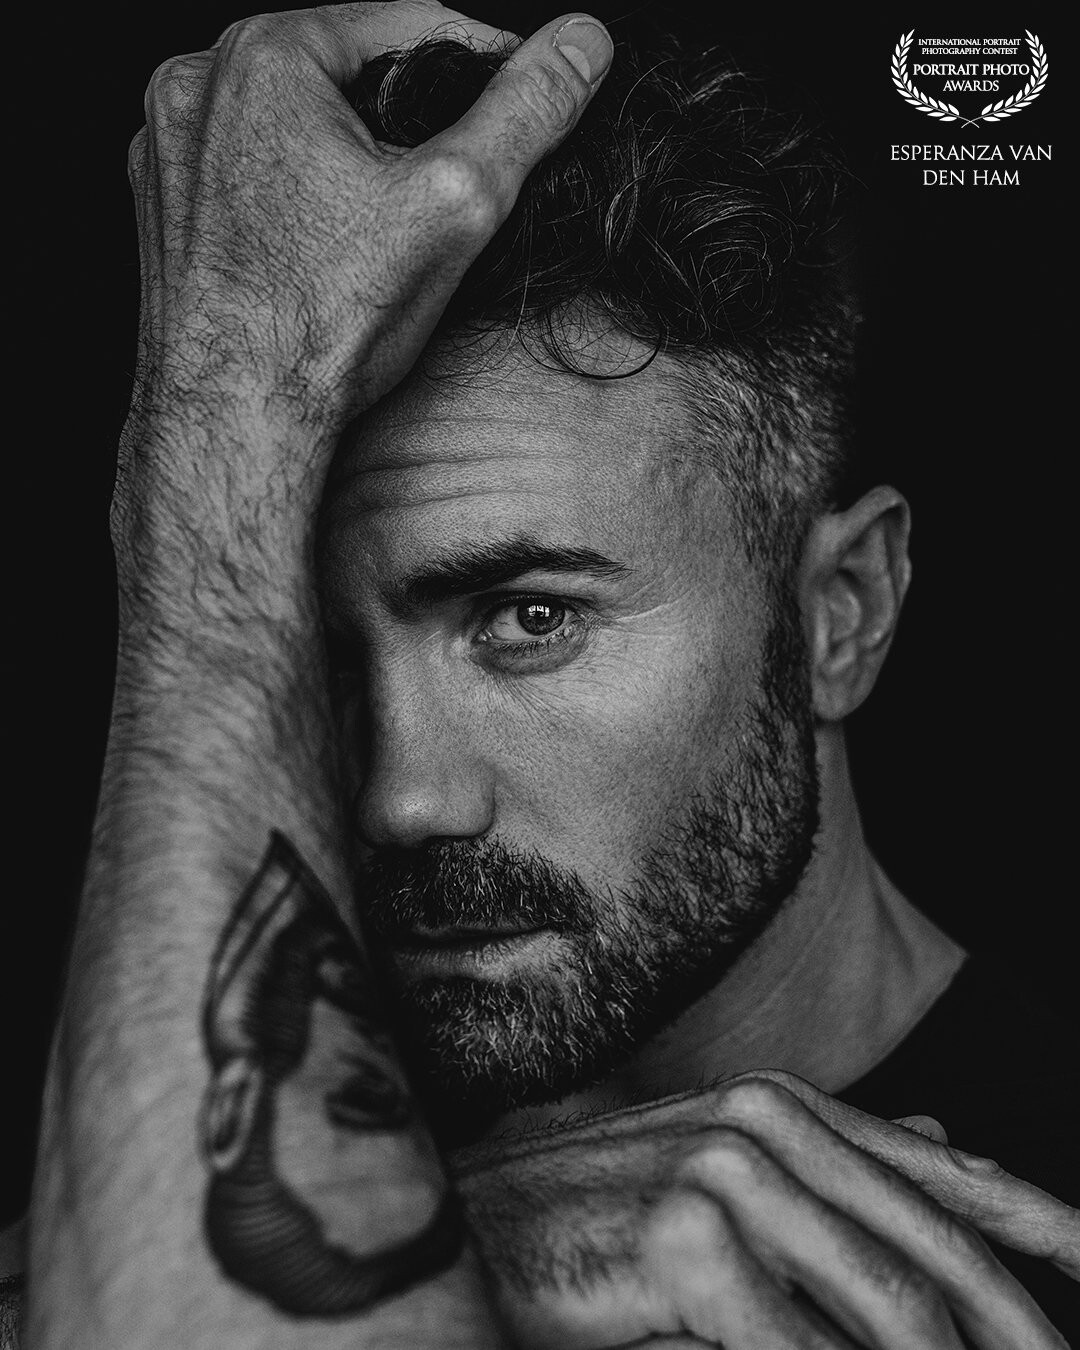 I love to play with the face, lines and the eyes en because of the black/white edit it makes it rough. <br />
<br />
Model: @ian_wlp<br />
Photographer & Lightroom edit: @iamshootingportraits<br />
www.iamshootingportraits.nl